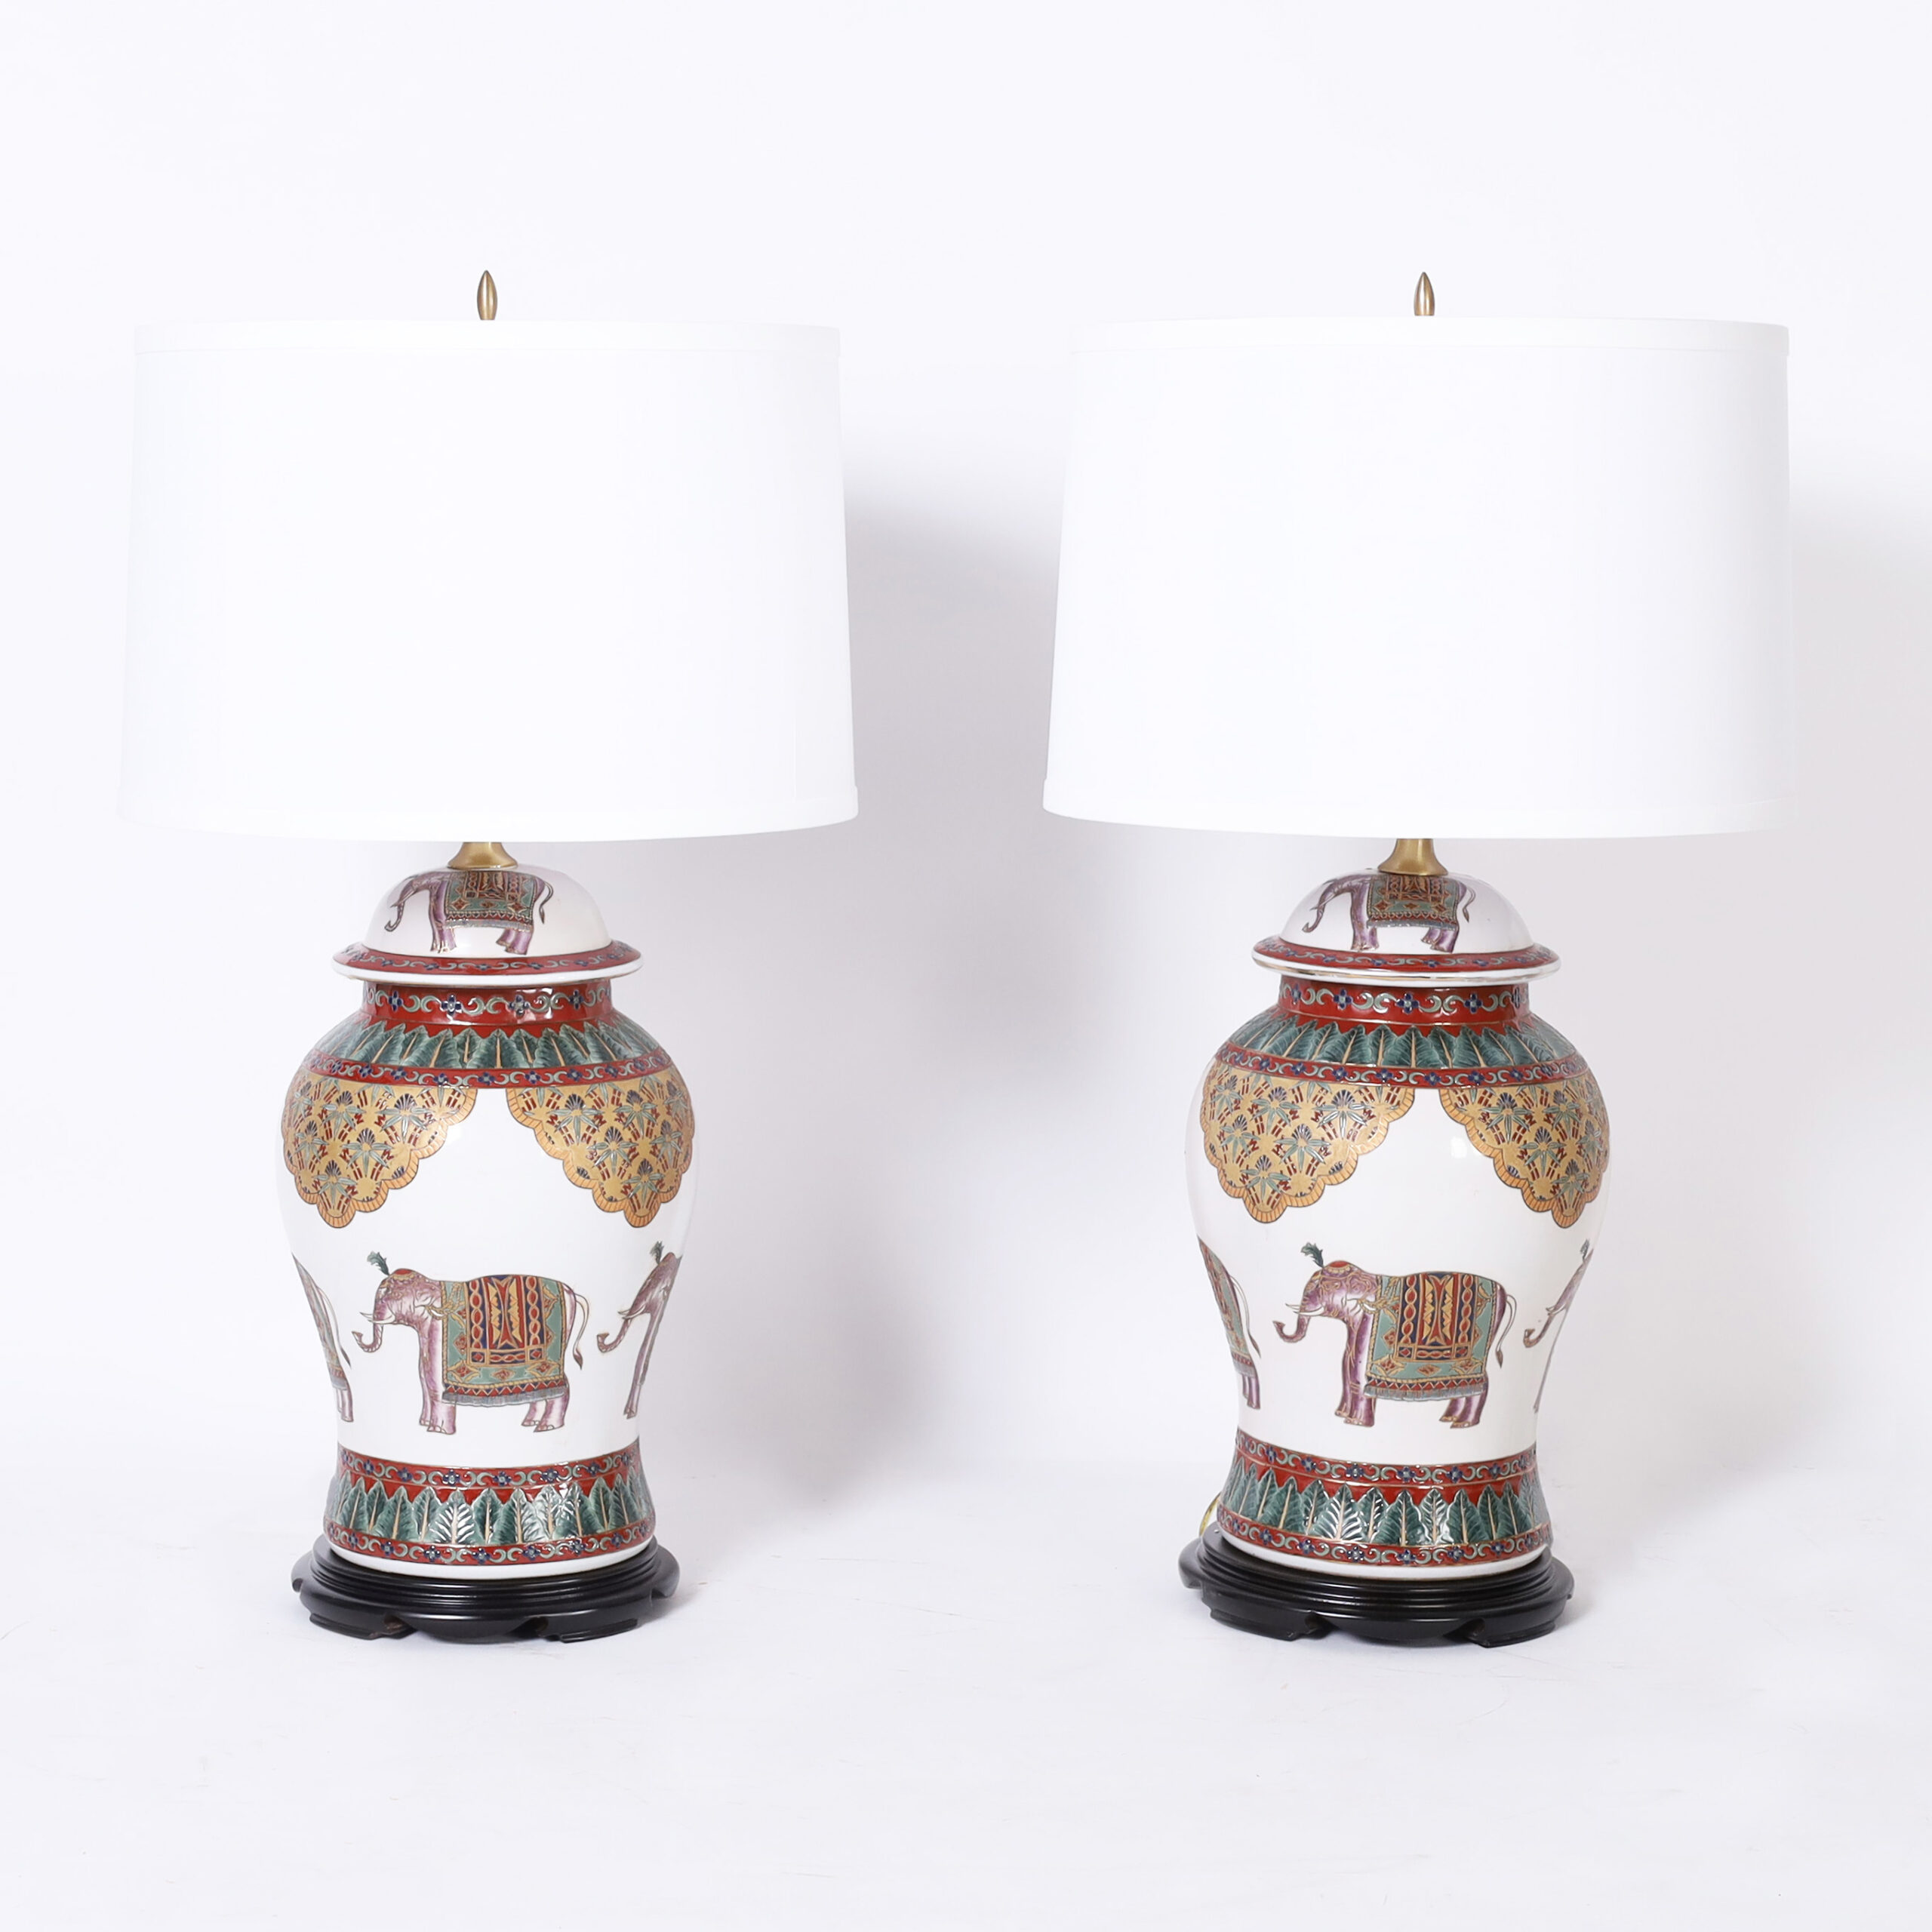 Pair of Vintage British Colonial Style Table Lamps with Elephants